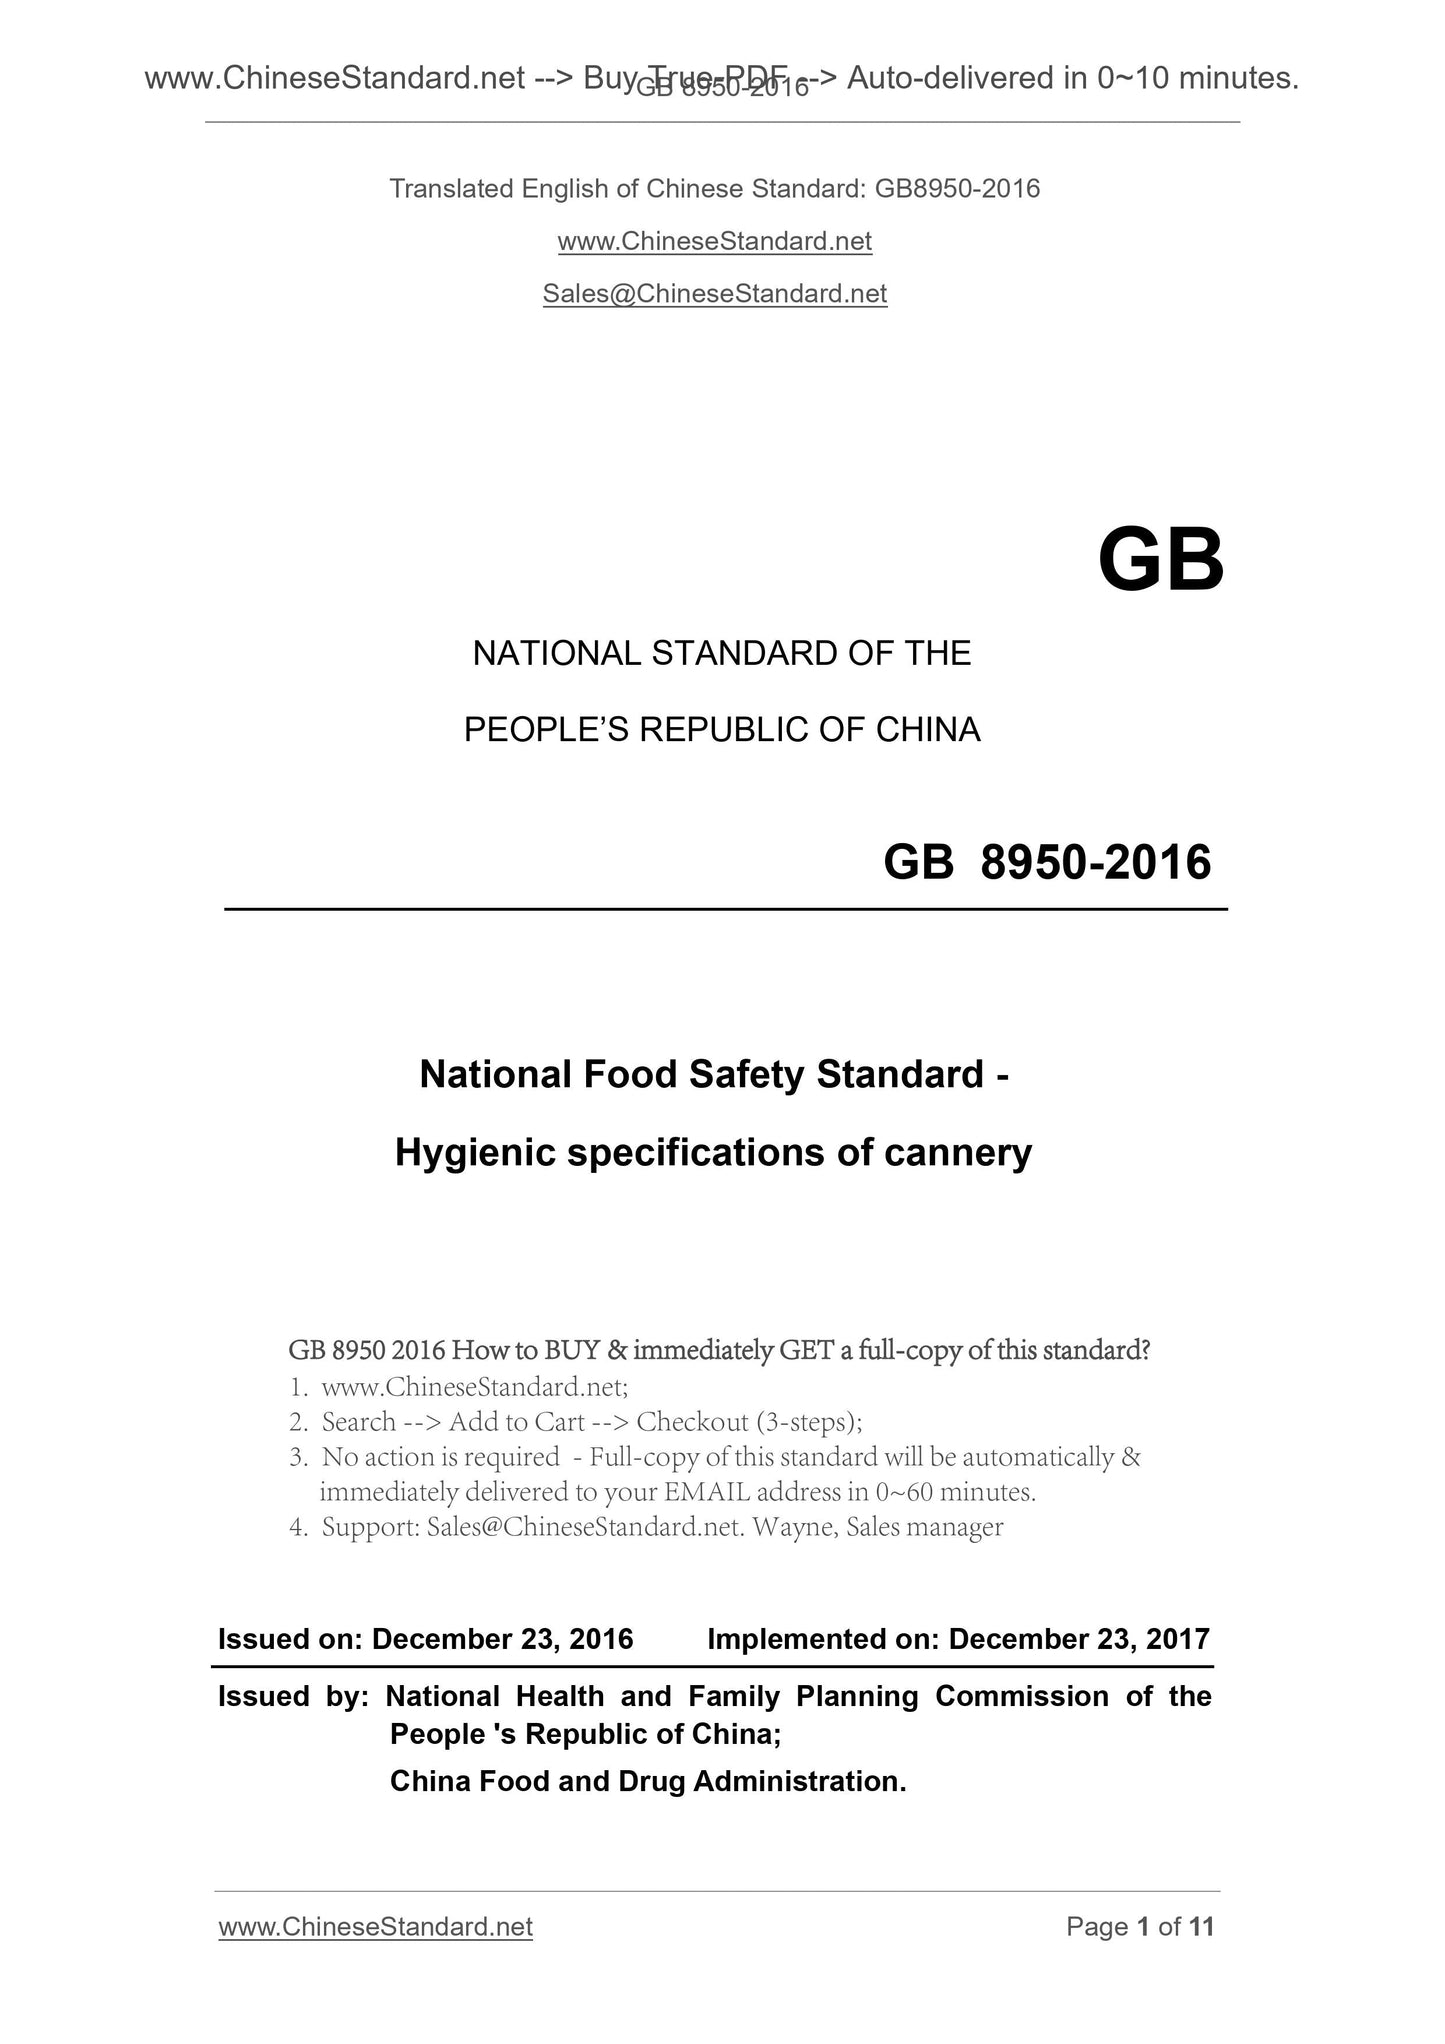 GB 8950-2016 Page 1